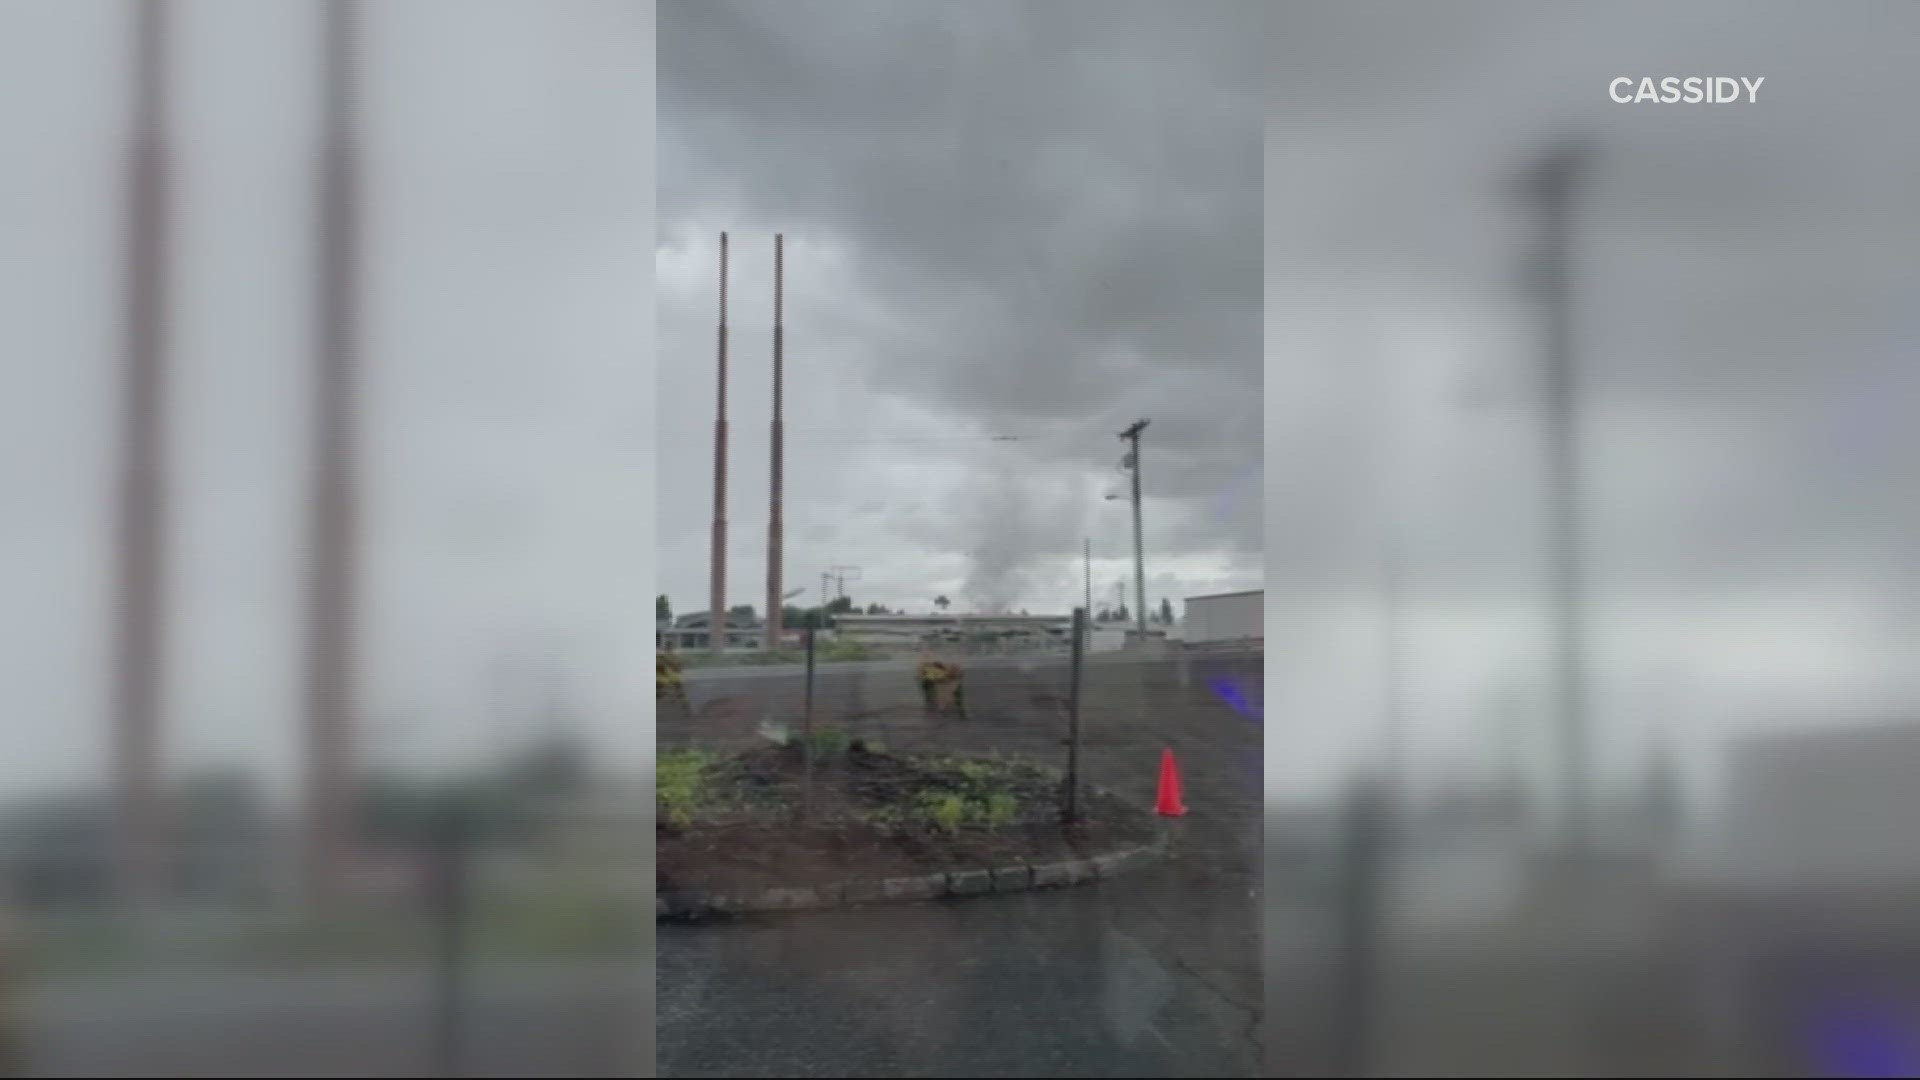 A tornado and waterspout were spotted on Sunday in Oregon and Washington, according to the National Weather Service of Portland.